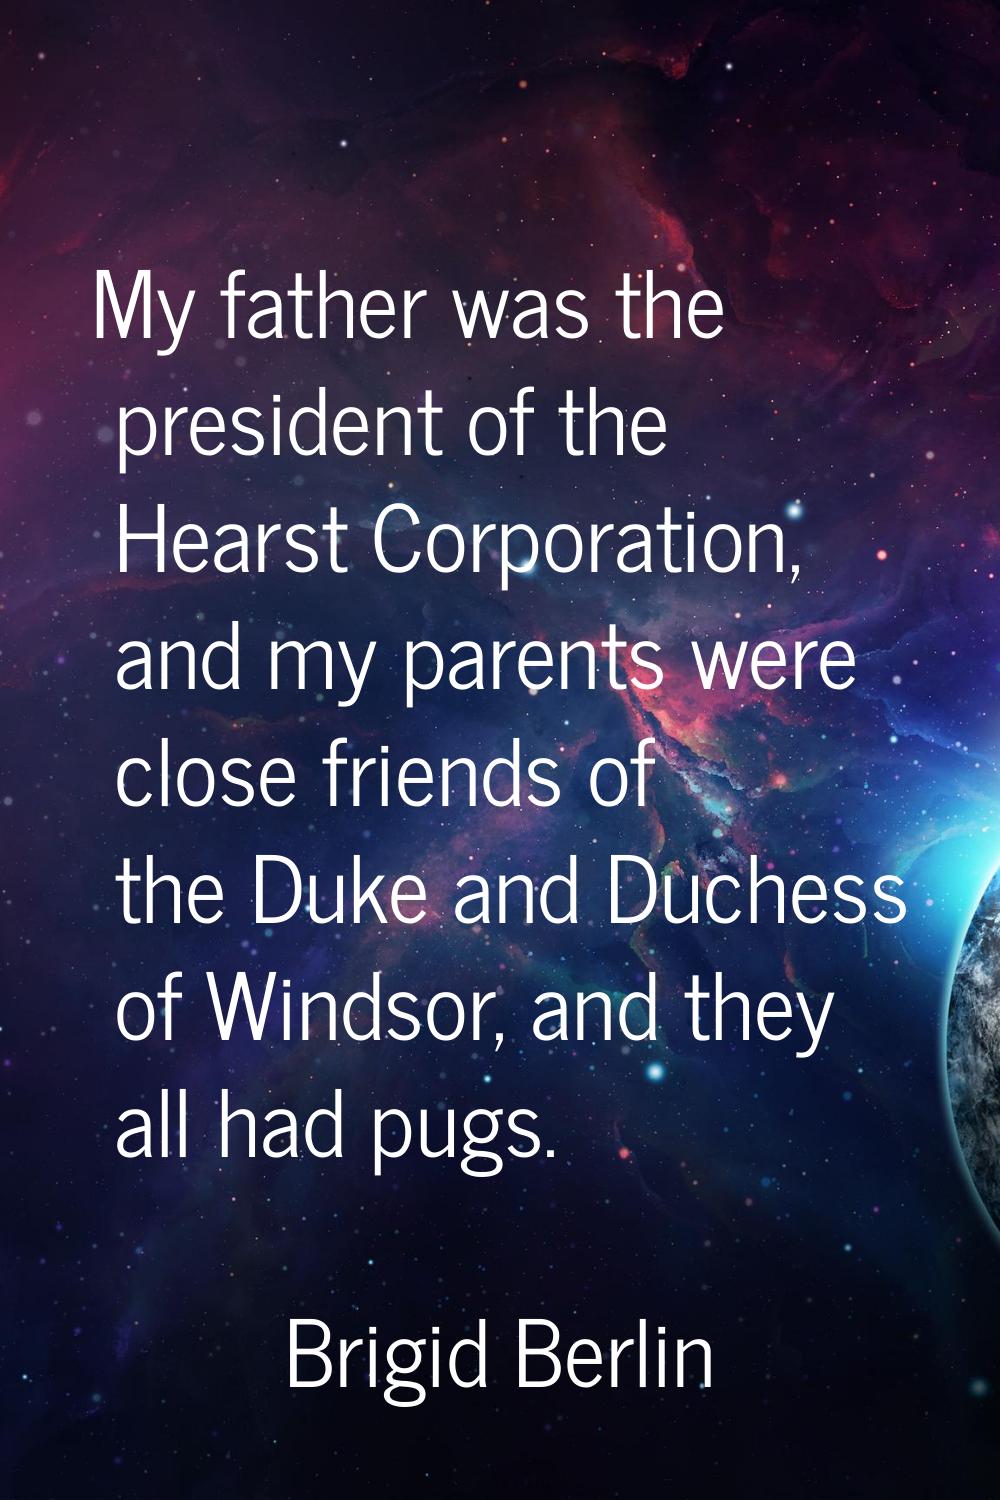 My father was the president of the Hearst Corporation, and my parents were close friends of the Duk